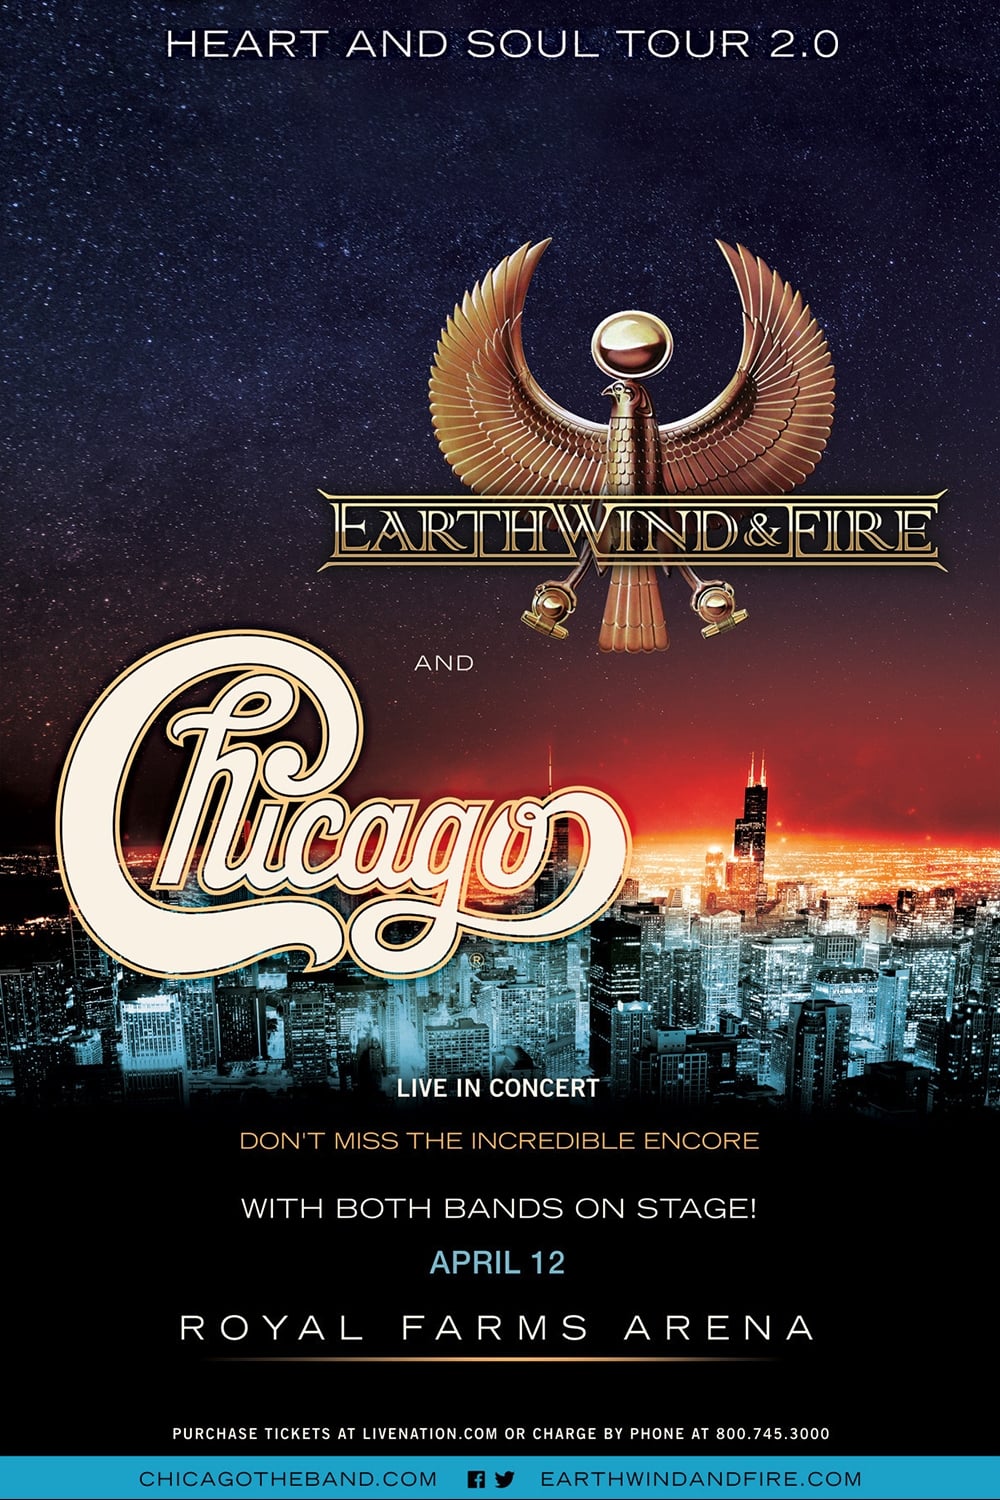 Chicago and Earth, Wind & Fire - Heart and Soul Tour 2015